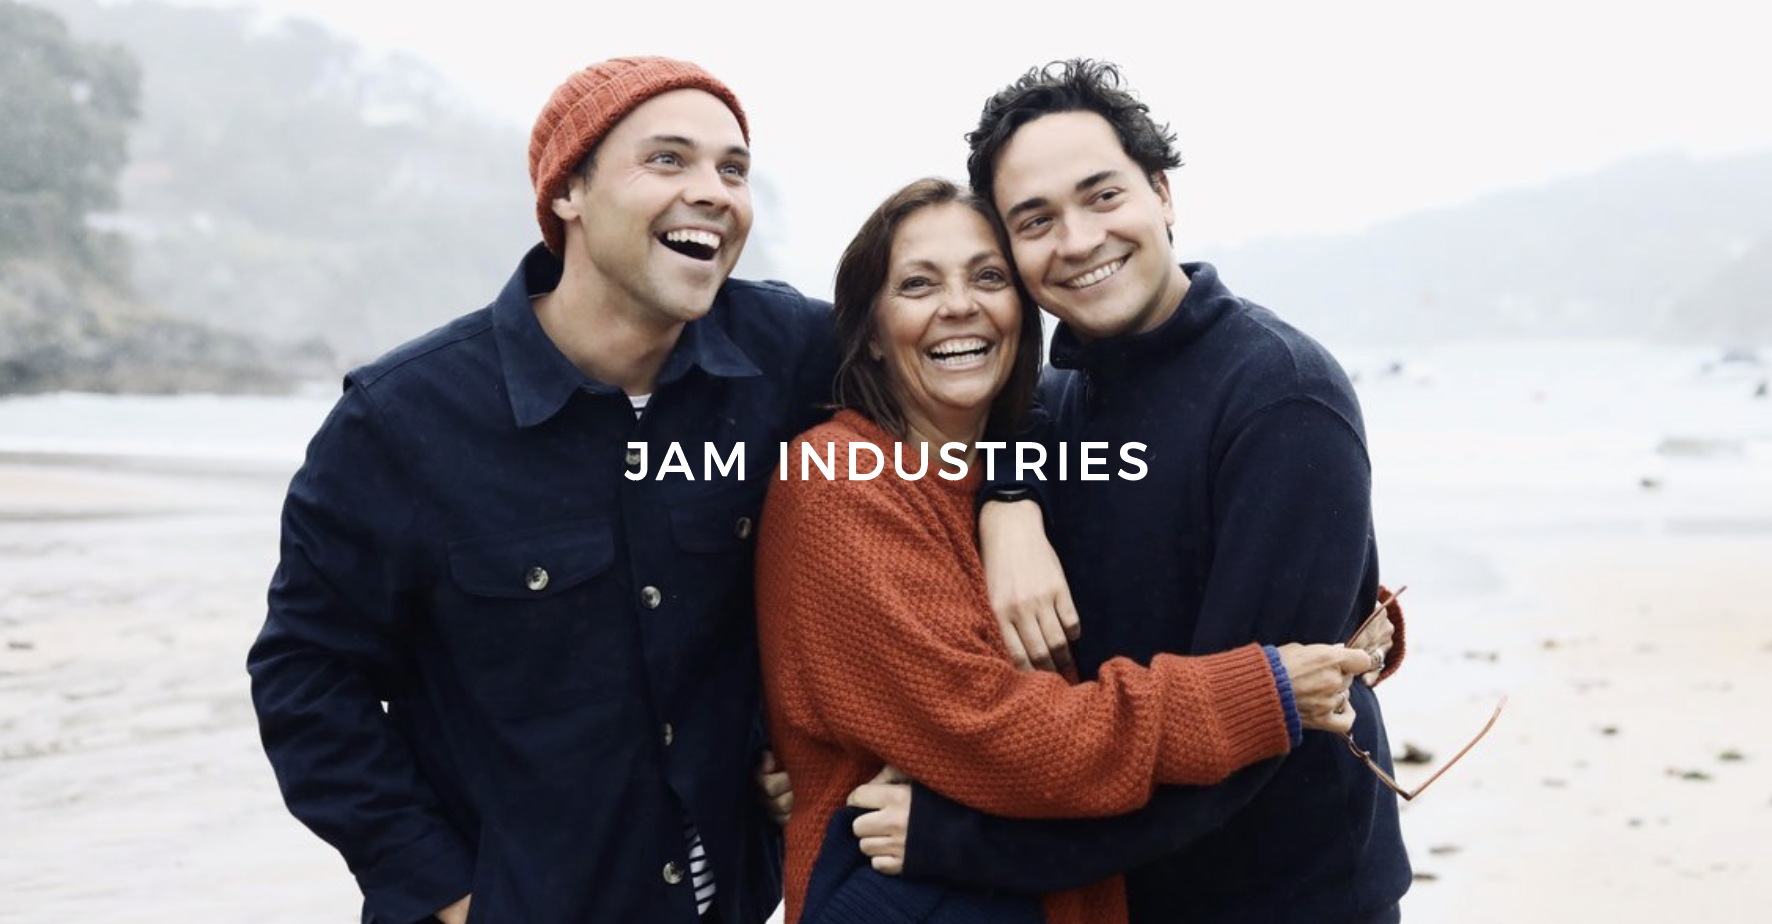 About – Jam Industries